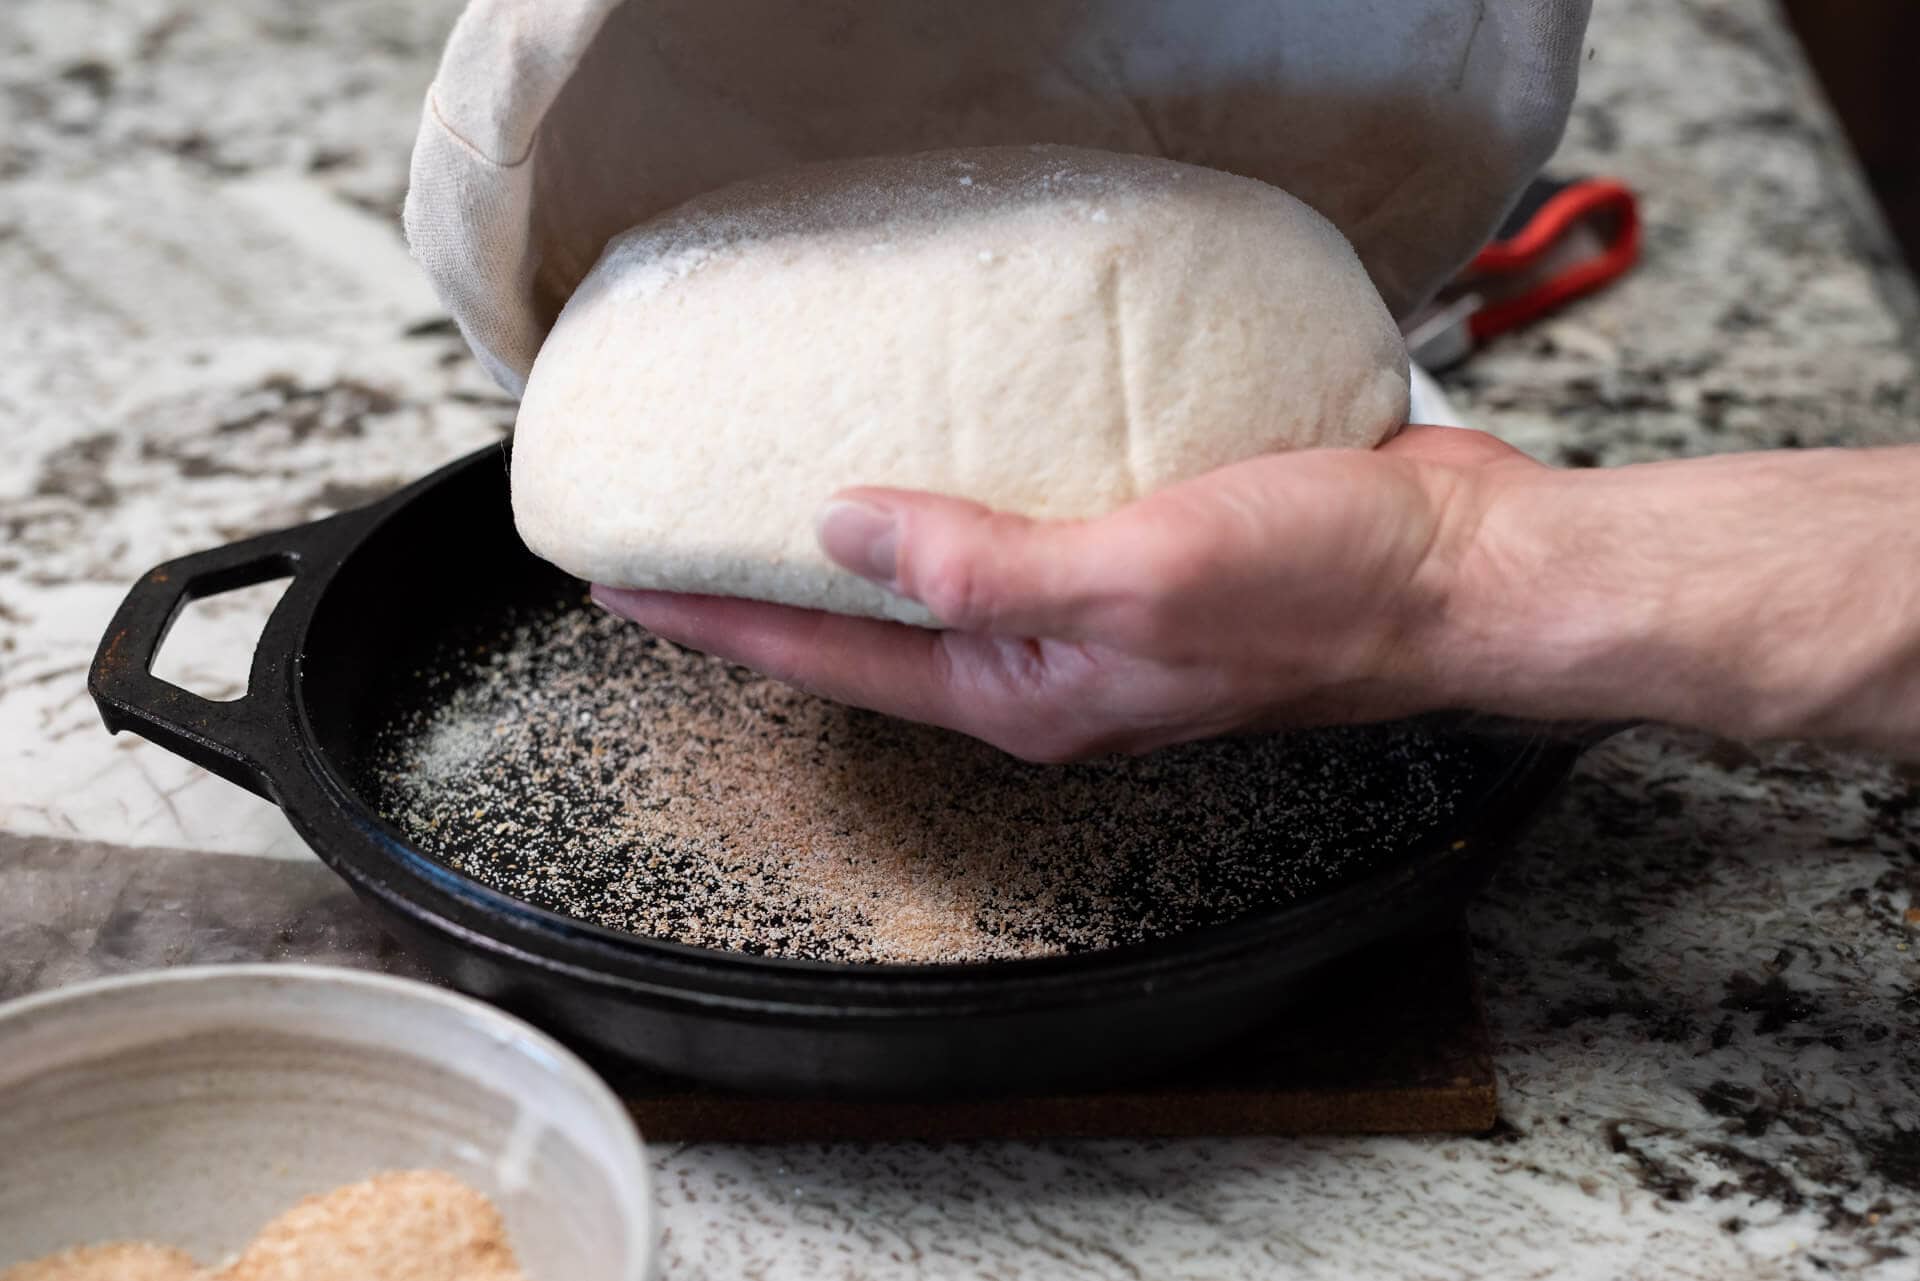 https://www.theperfectloaf.com/wp-content/uploads/2019/01/theperfectloaf-baking-bread-in-a-dutch-oven-feature-13.jpg